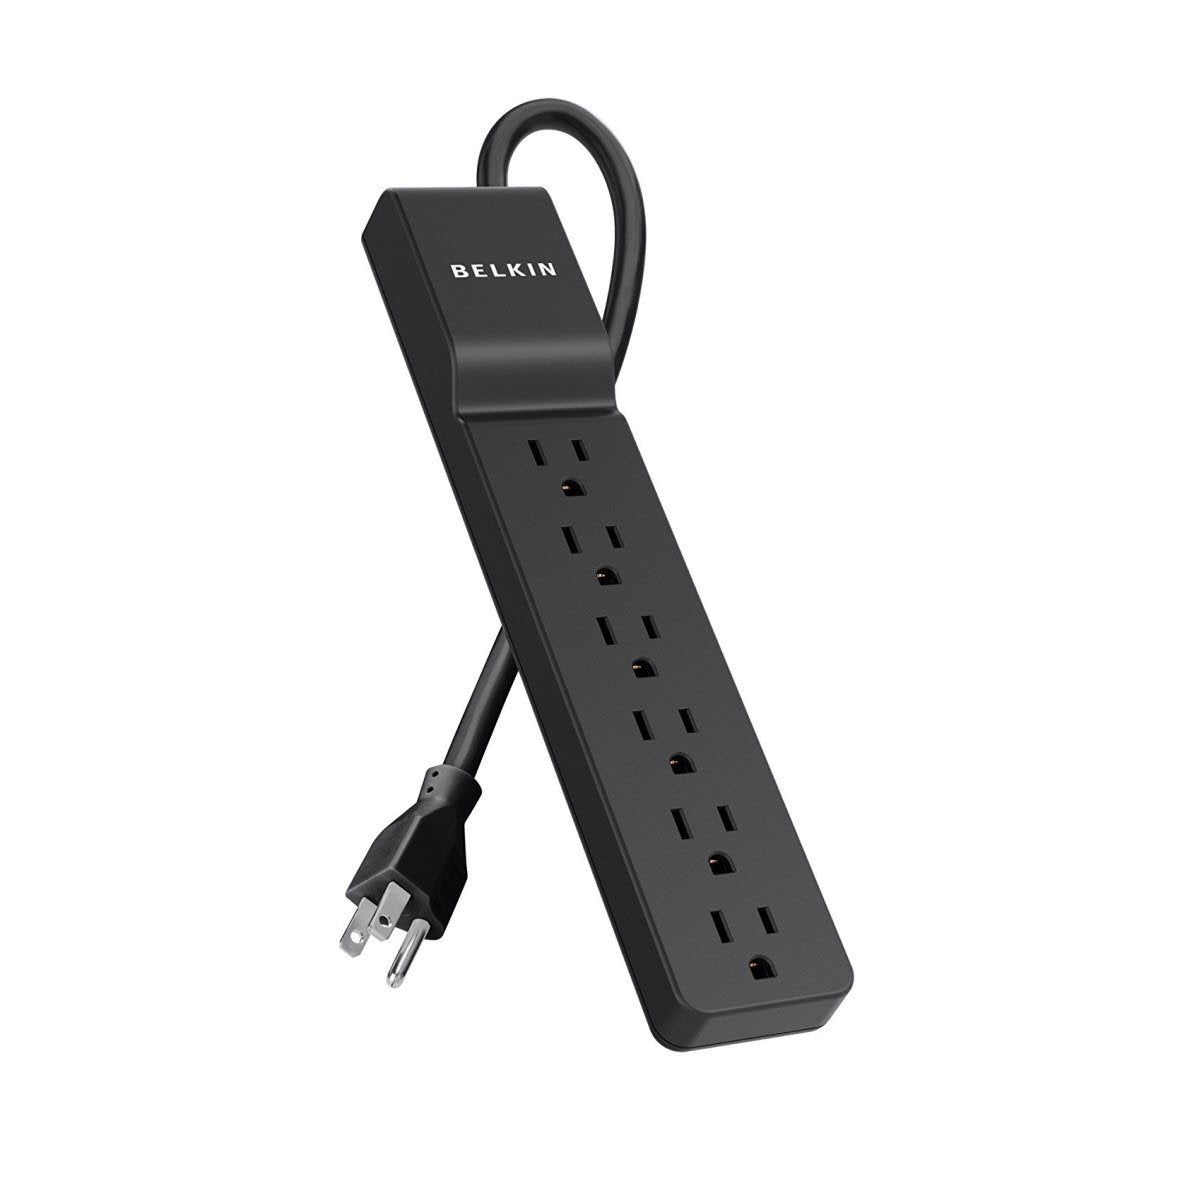 Belkin 6-Outlet Home/Office Surge Protector with Essential Power Filtration and 4-Foot Cord, 555 Joules